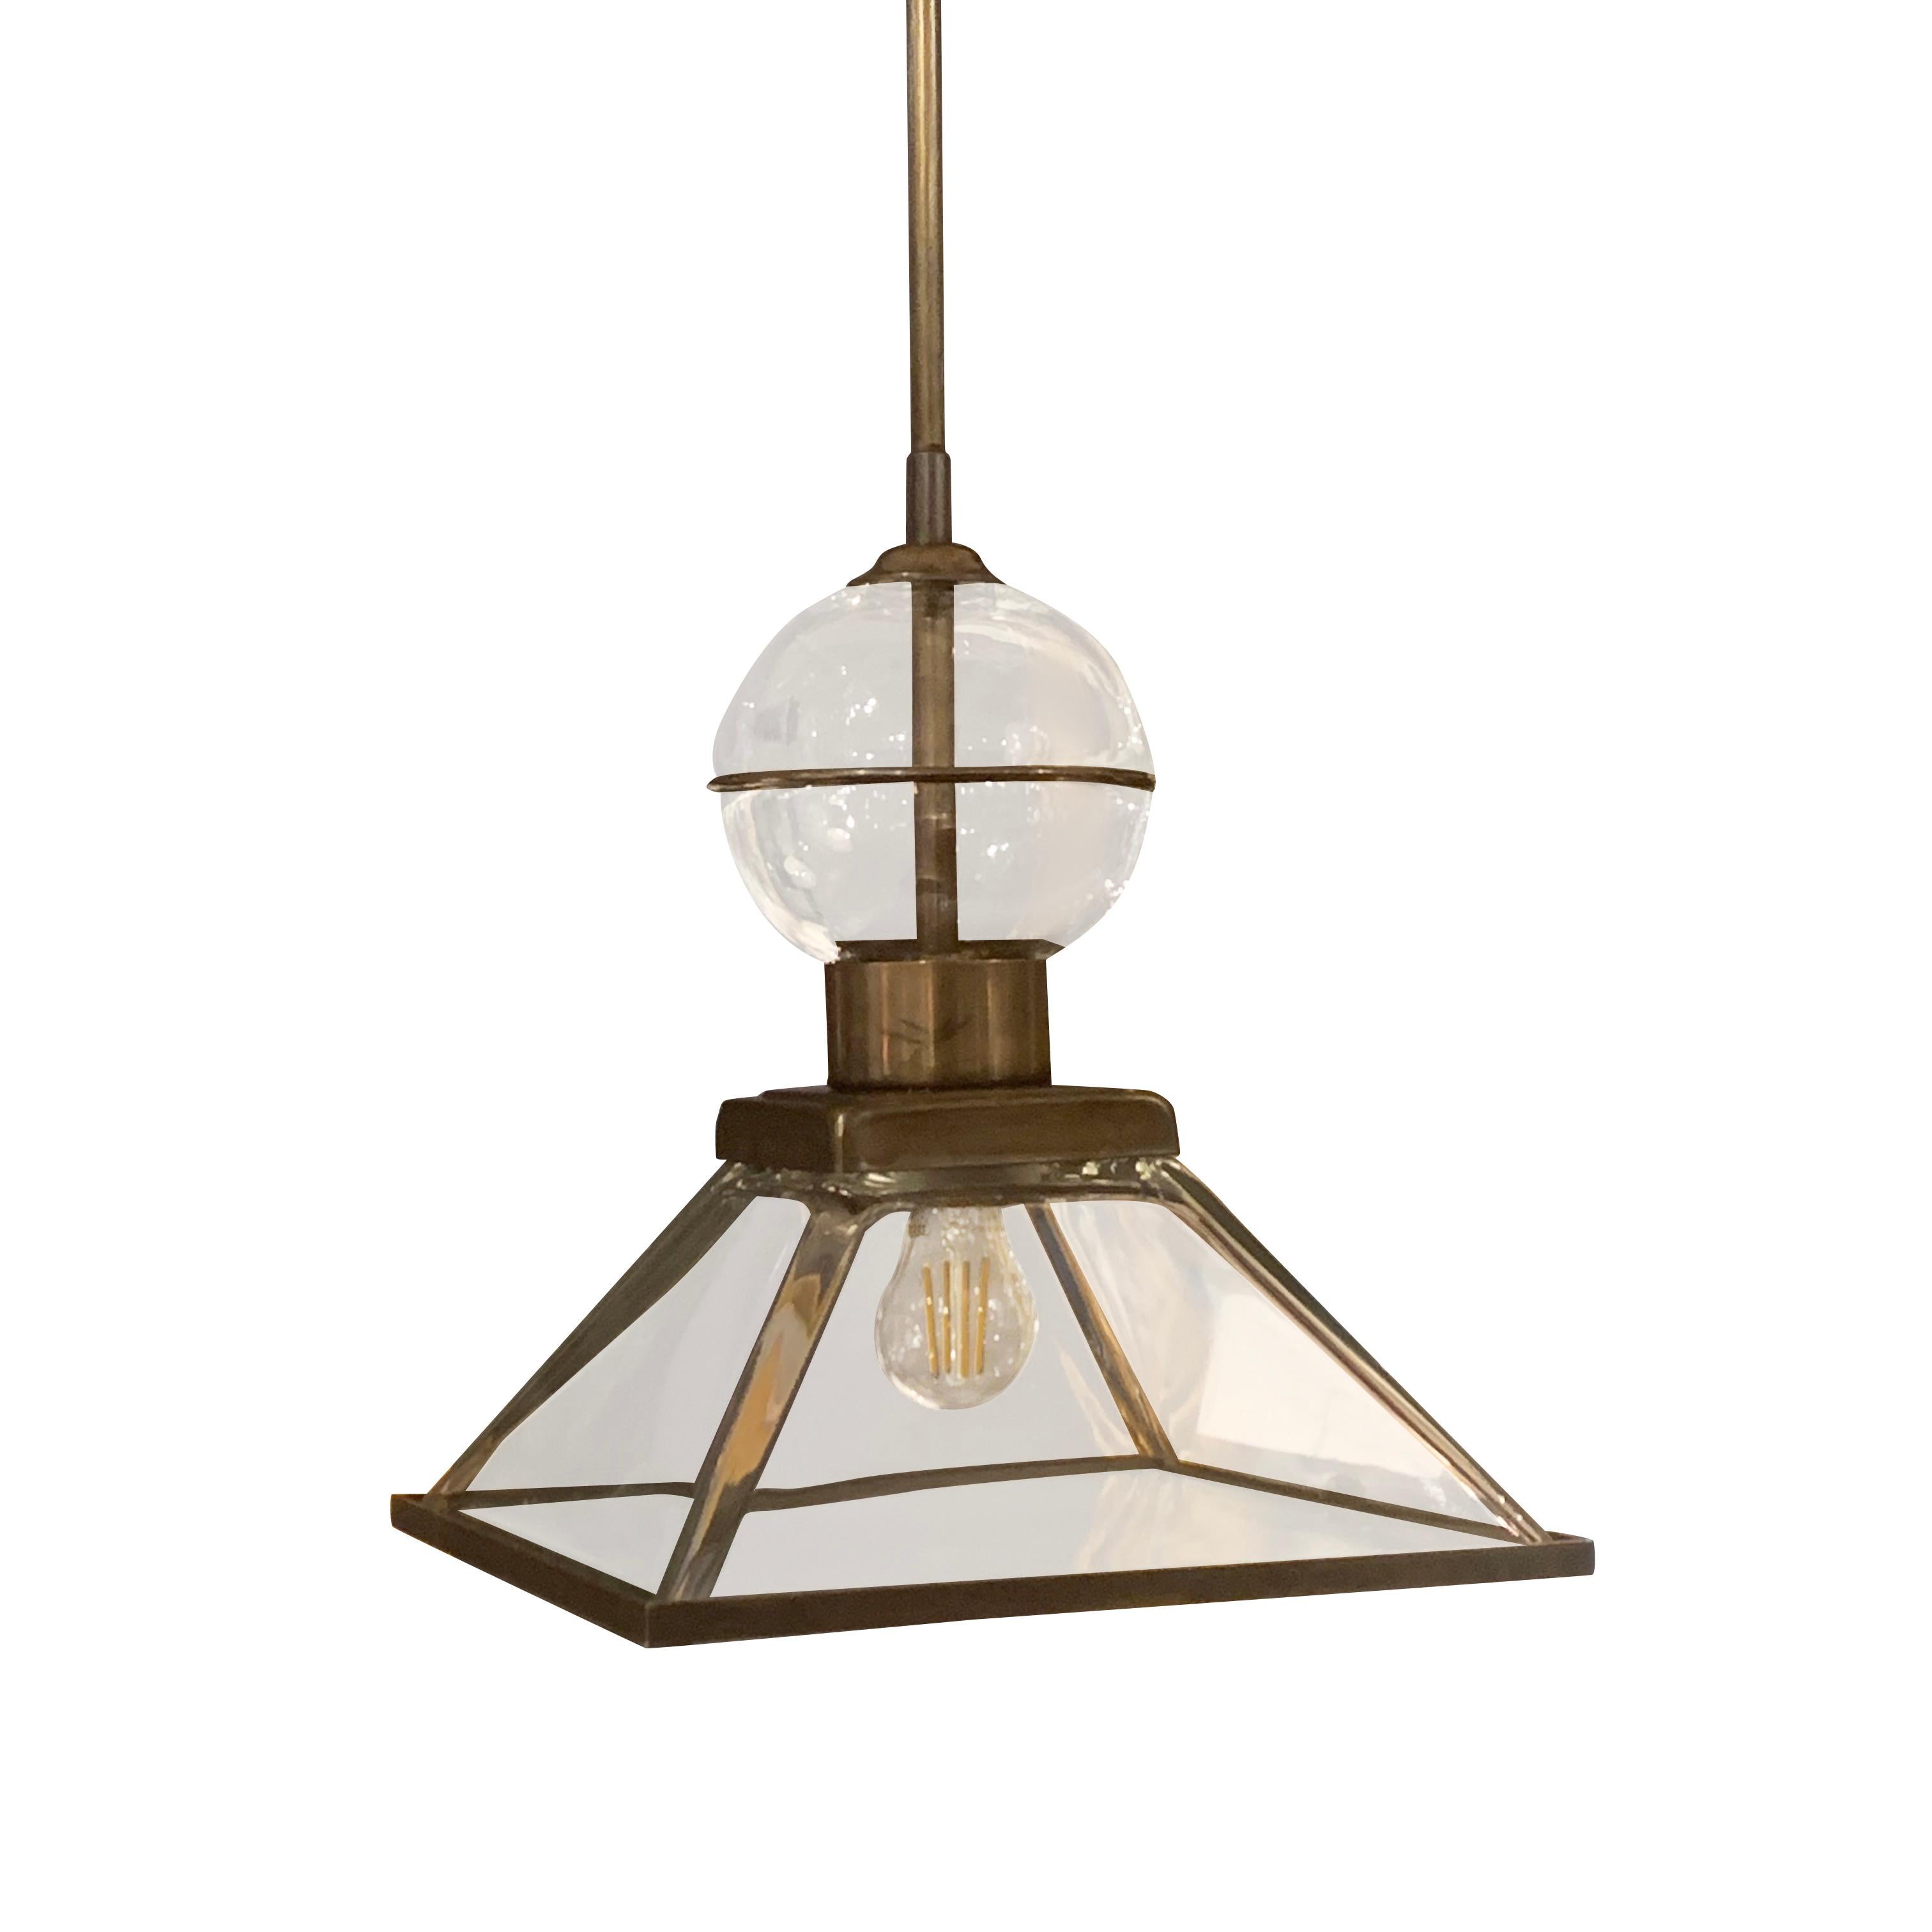 Contemporary Italian square glass pendant lights.
Decorative glass sphere sits atop the pyramid shaped fixture.
Brushed brass surrounding the glass, rod and canopy.
These square glass pendants can be ordered in multiples.
Fixture only height is